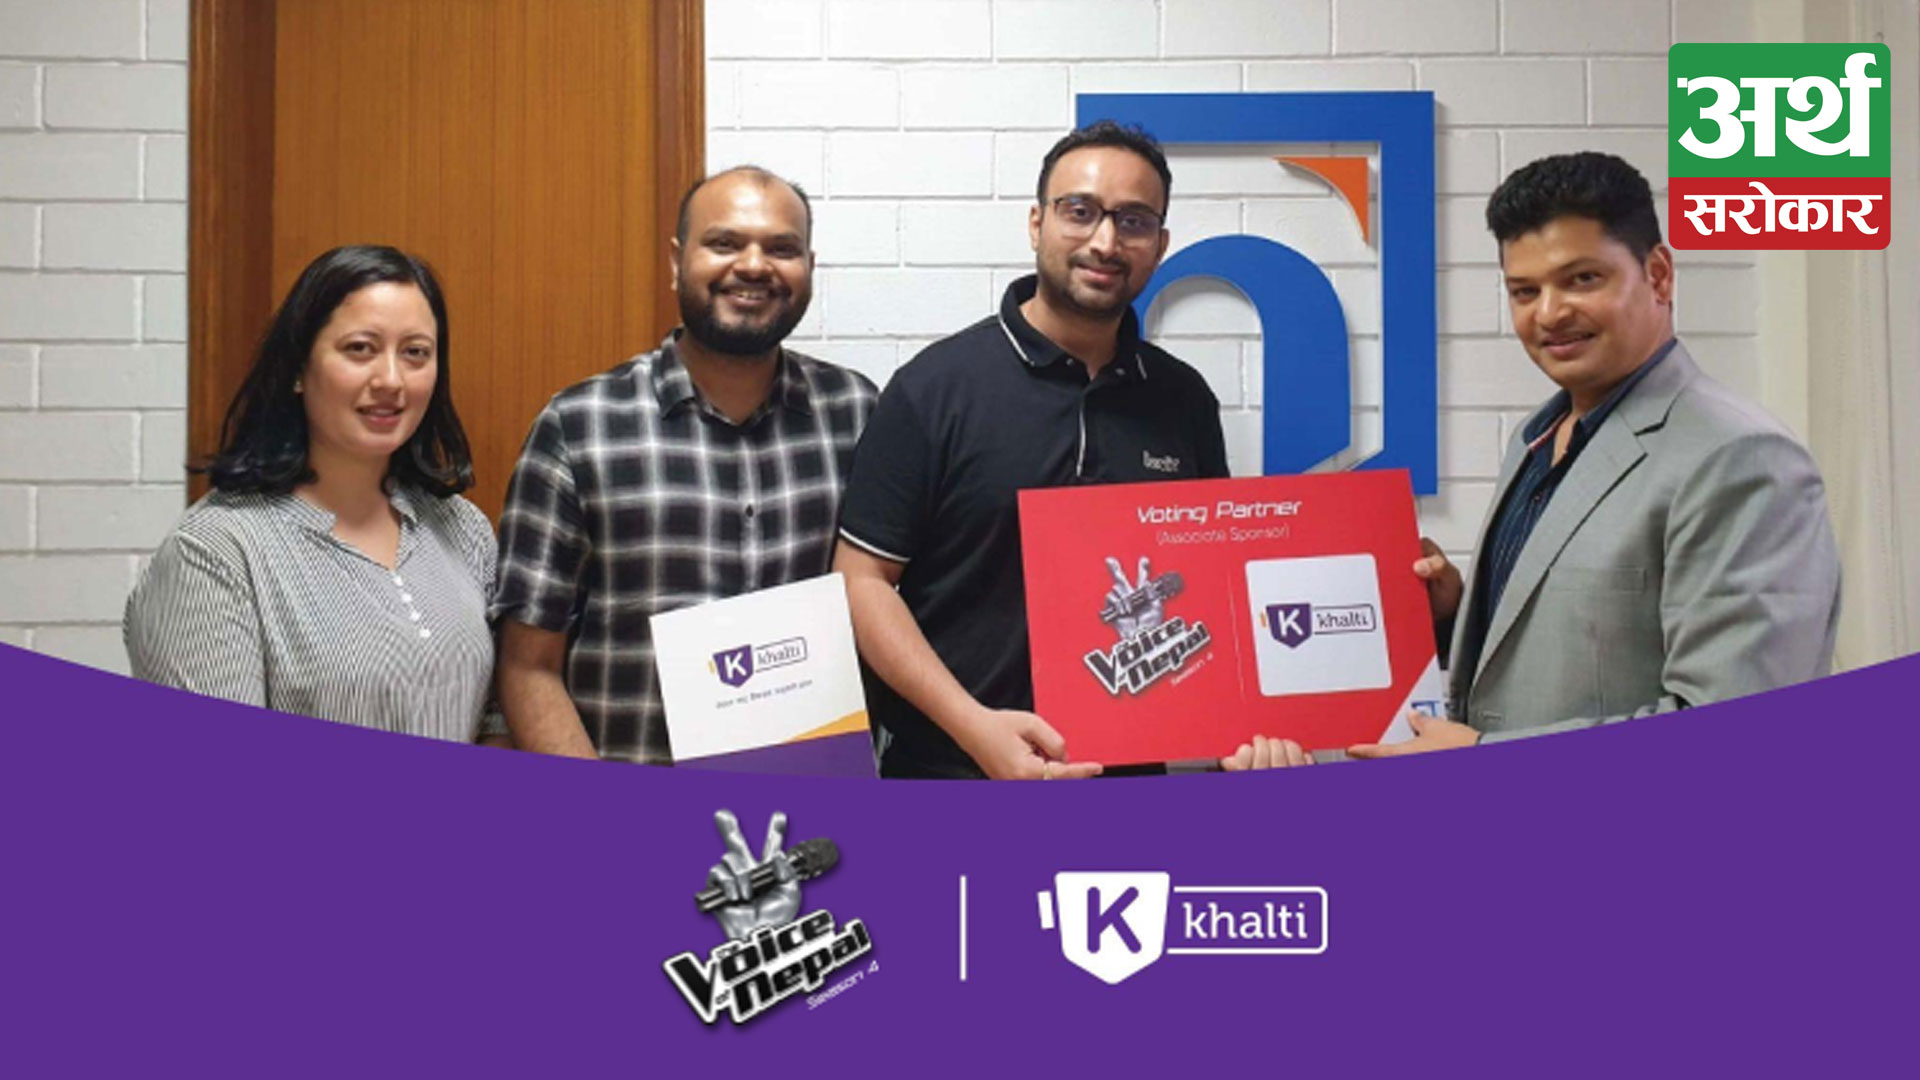 Khalti partners with ‘The Voice Nepal’ as an exclusive Voting and ticketing partner